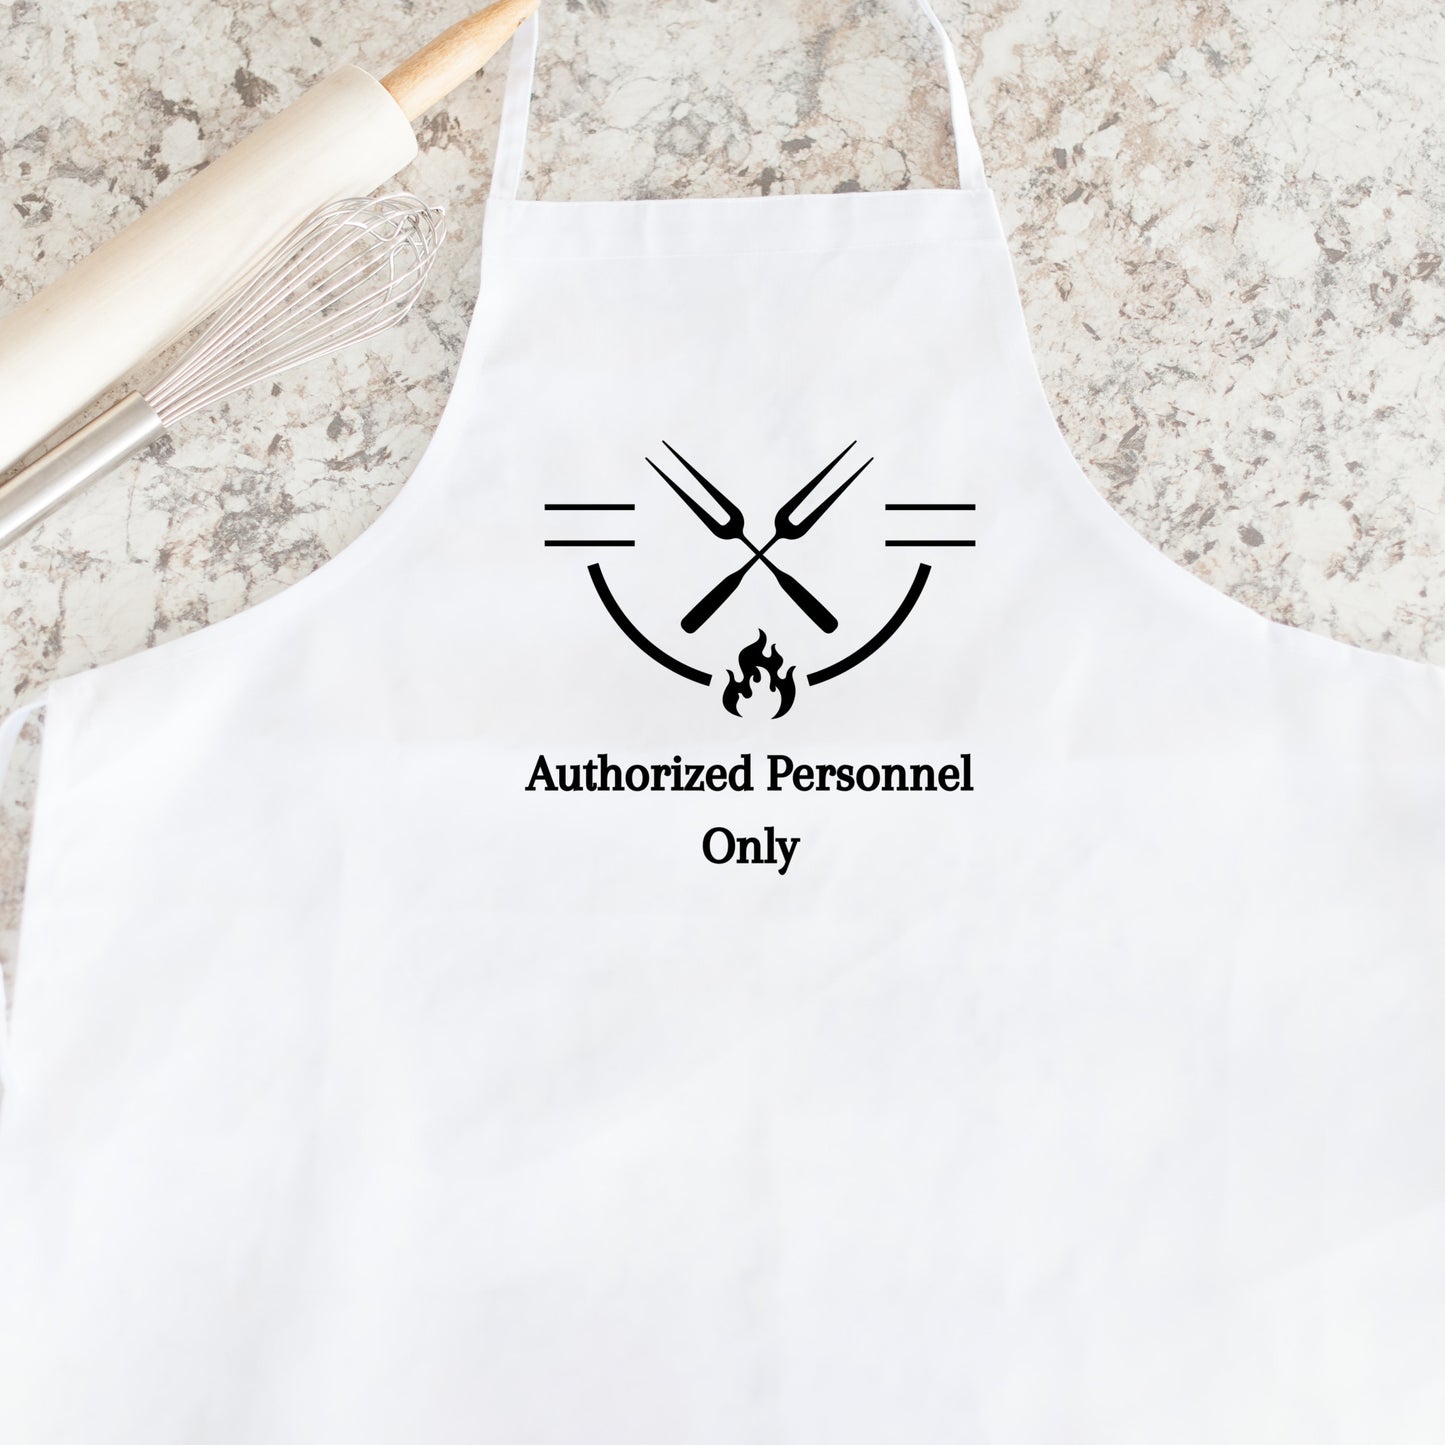 Classic White Apron - Authorized Personnel Only